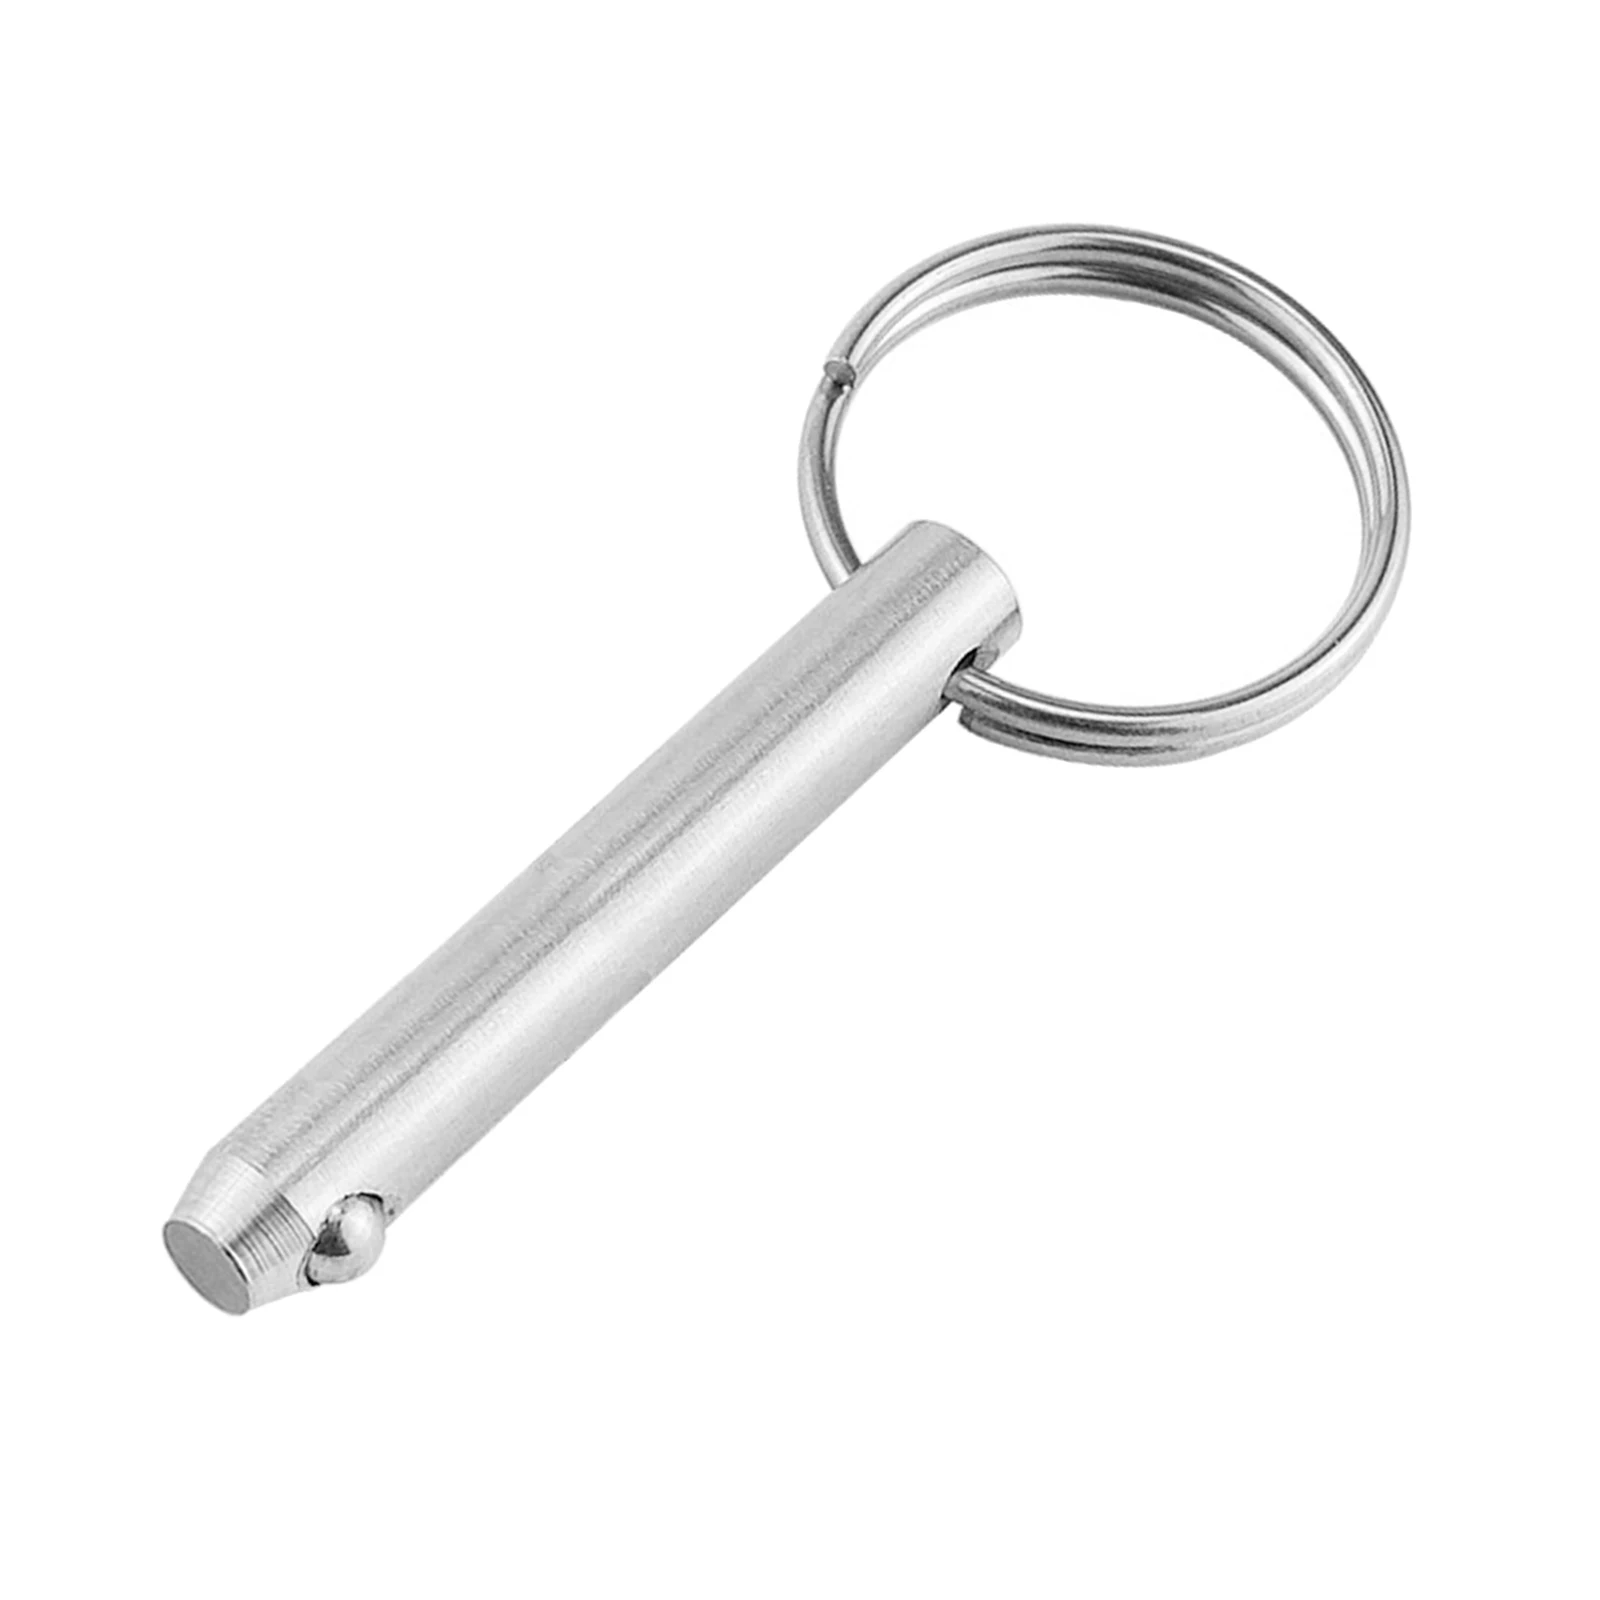 Bimini Top Pin, 8mm Hardware Marine Stainless Steel Quick Release Ball Pin, for Boat Bimini Top Deck Hinge, Boats Accessories